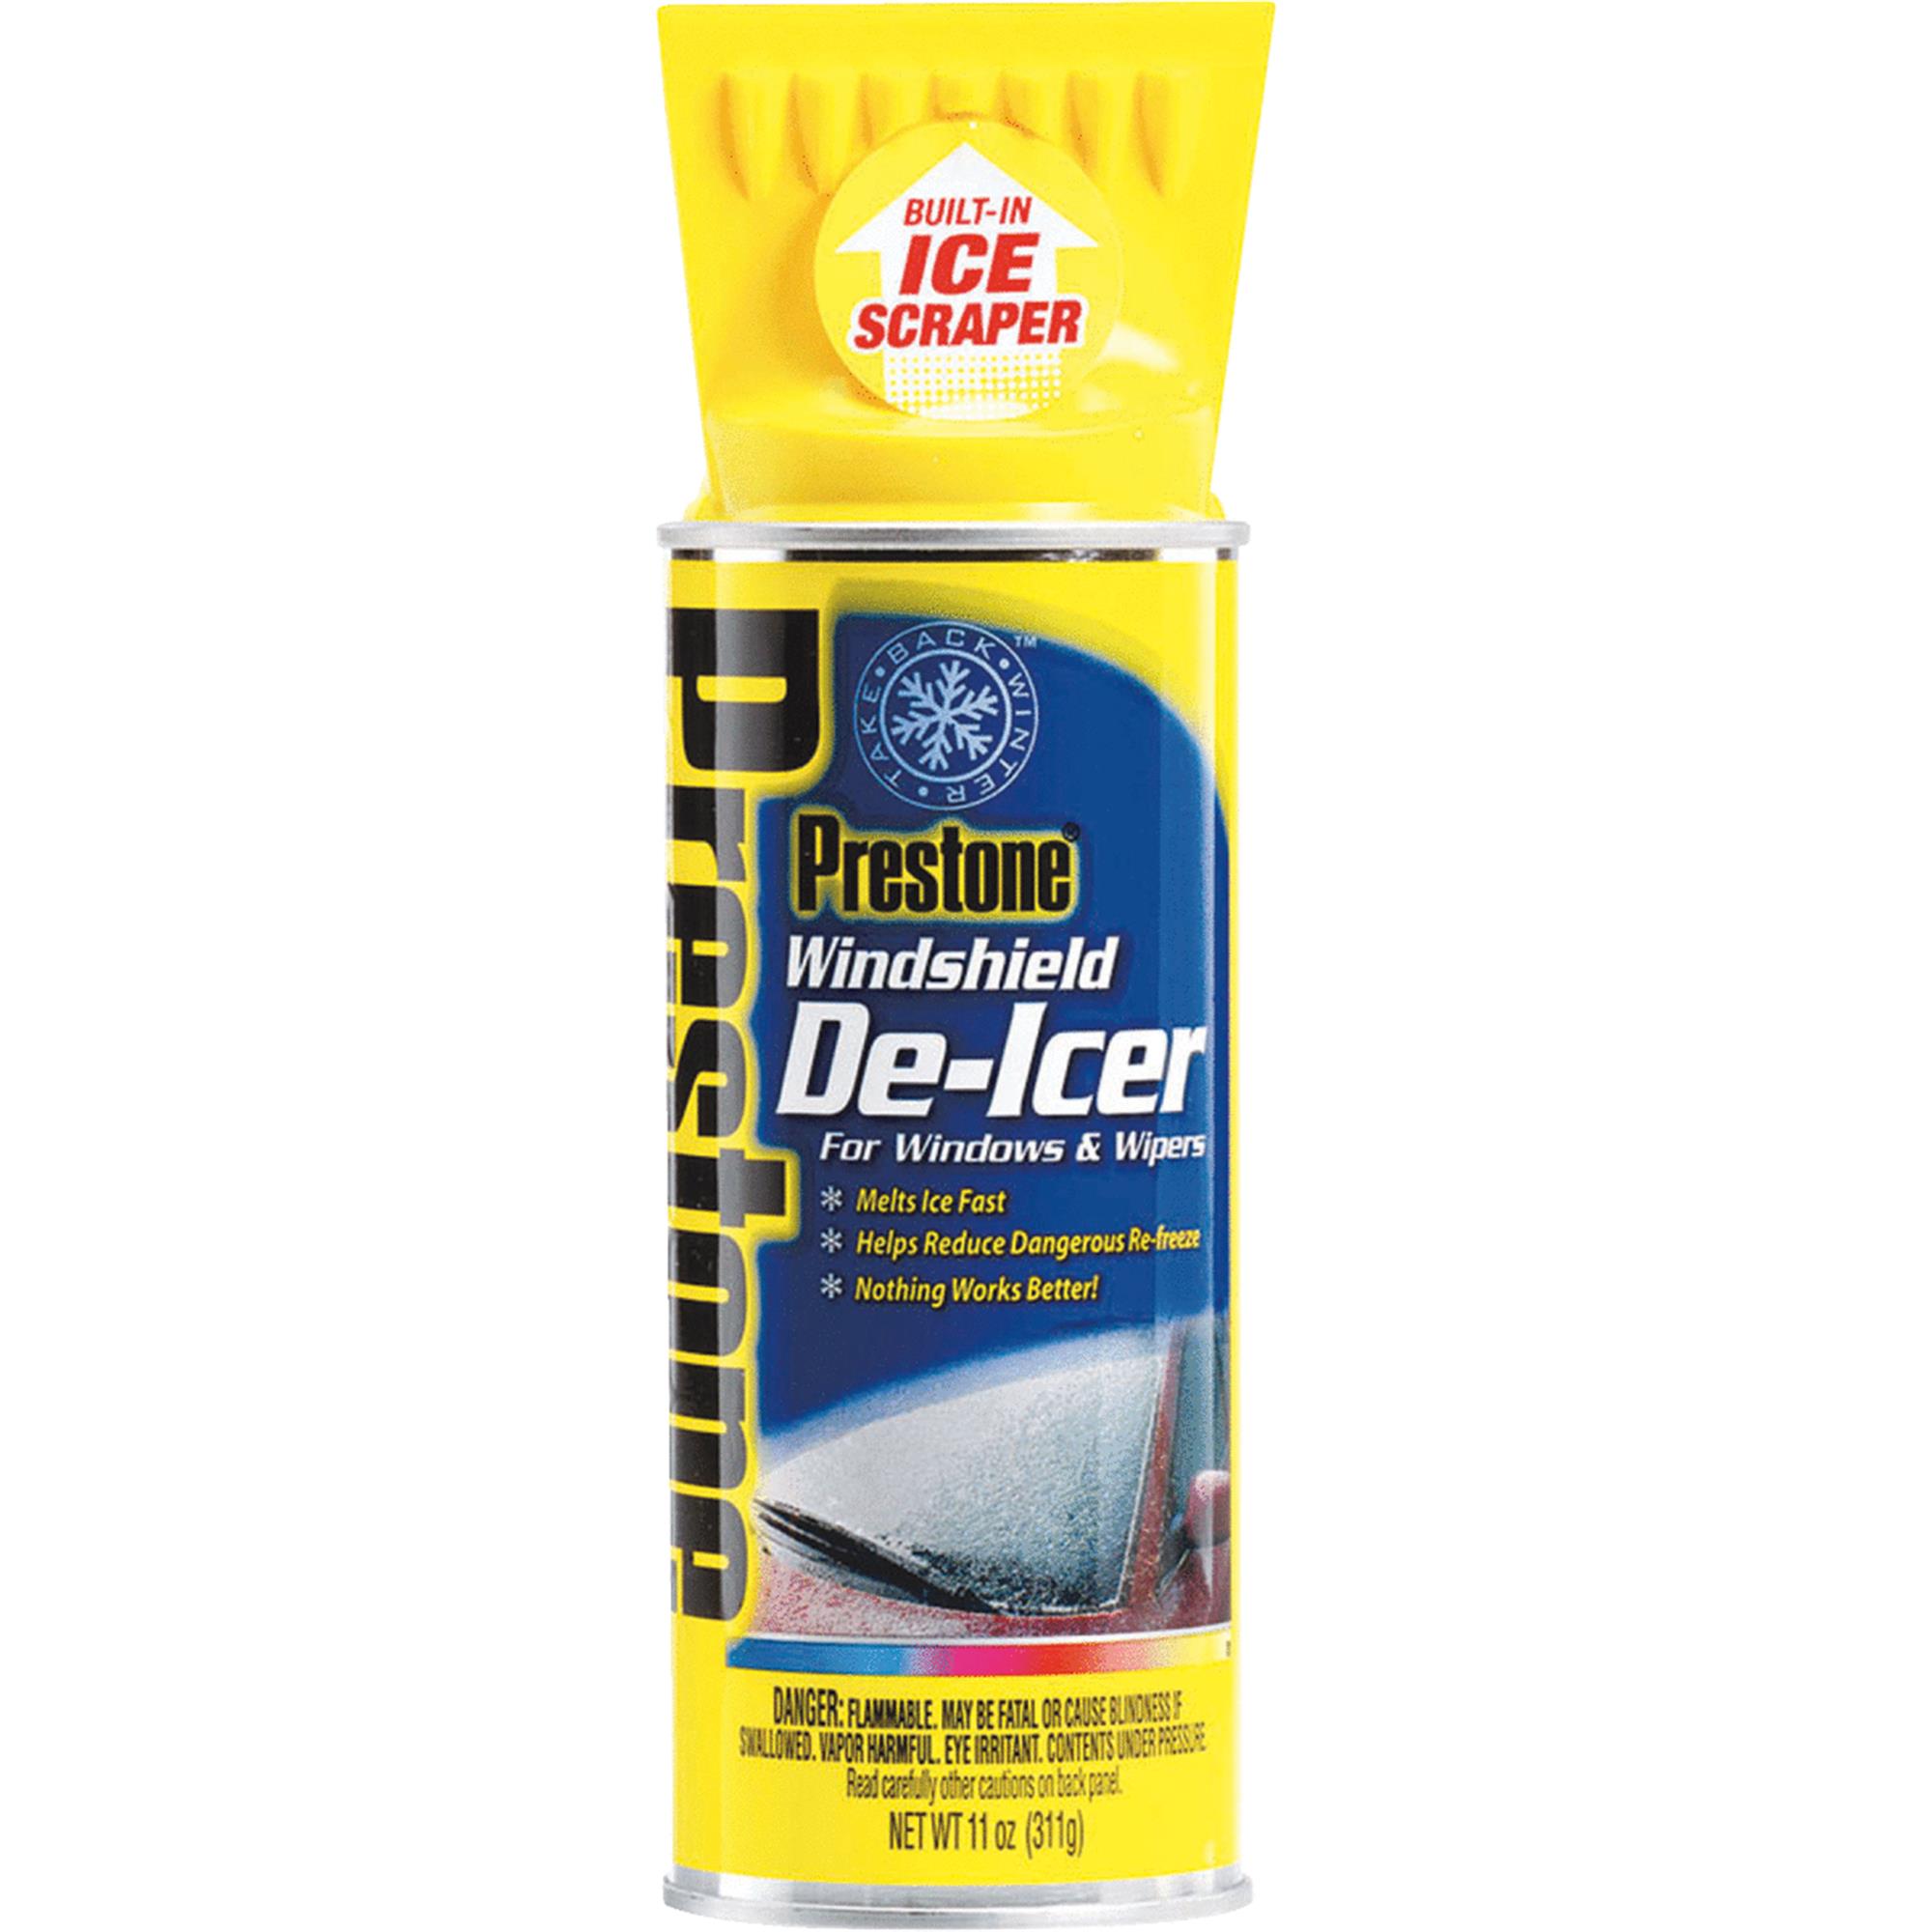 can of deicer